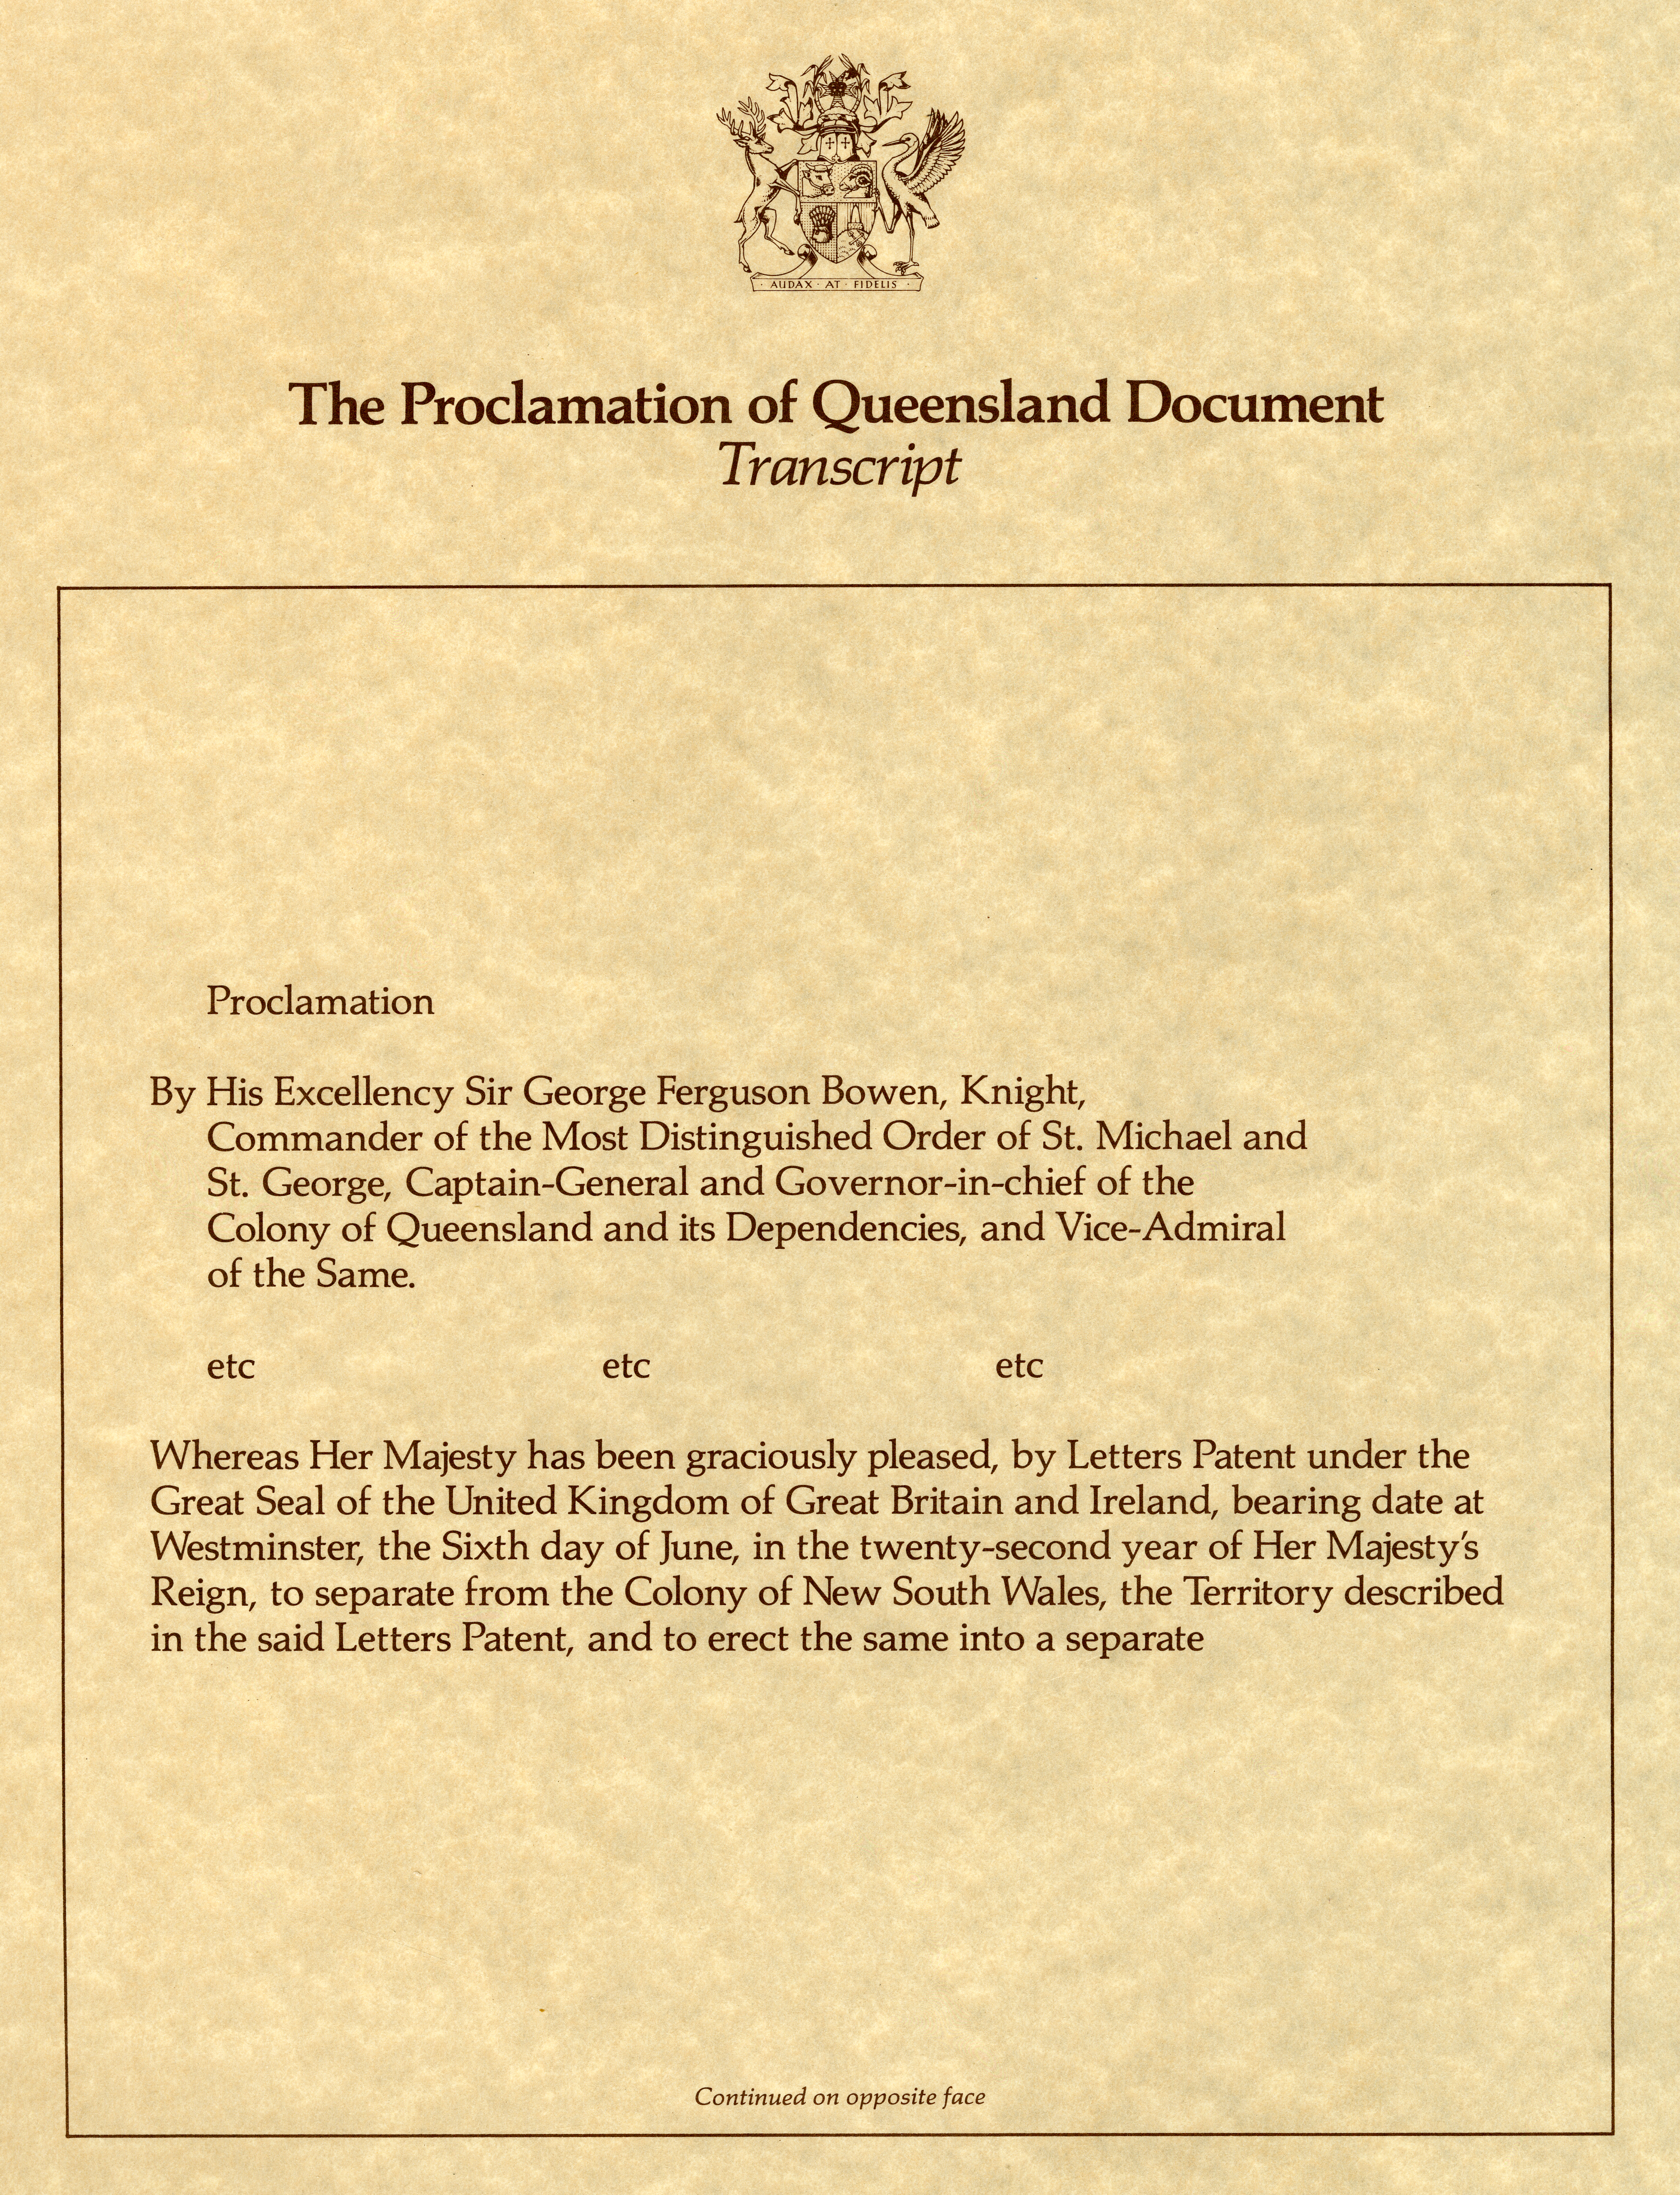 Transcript of the Proclamation of Queensland document page 1